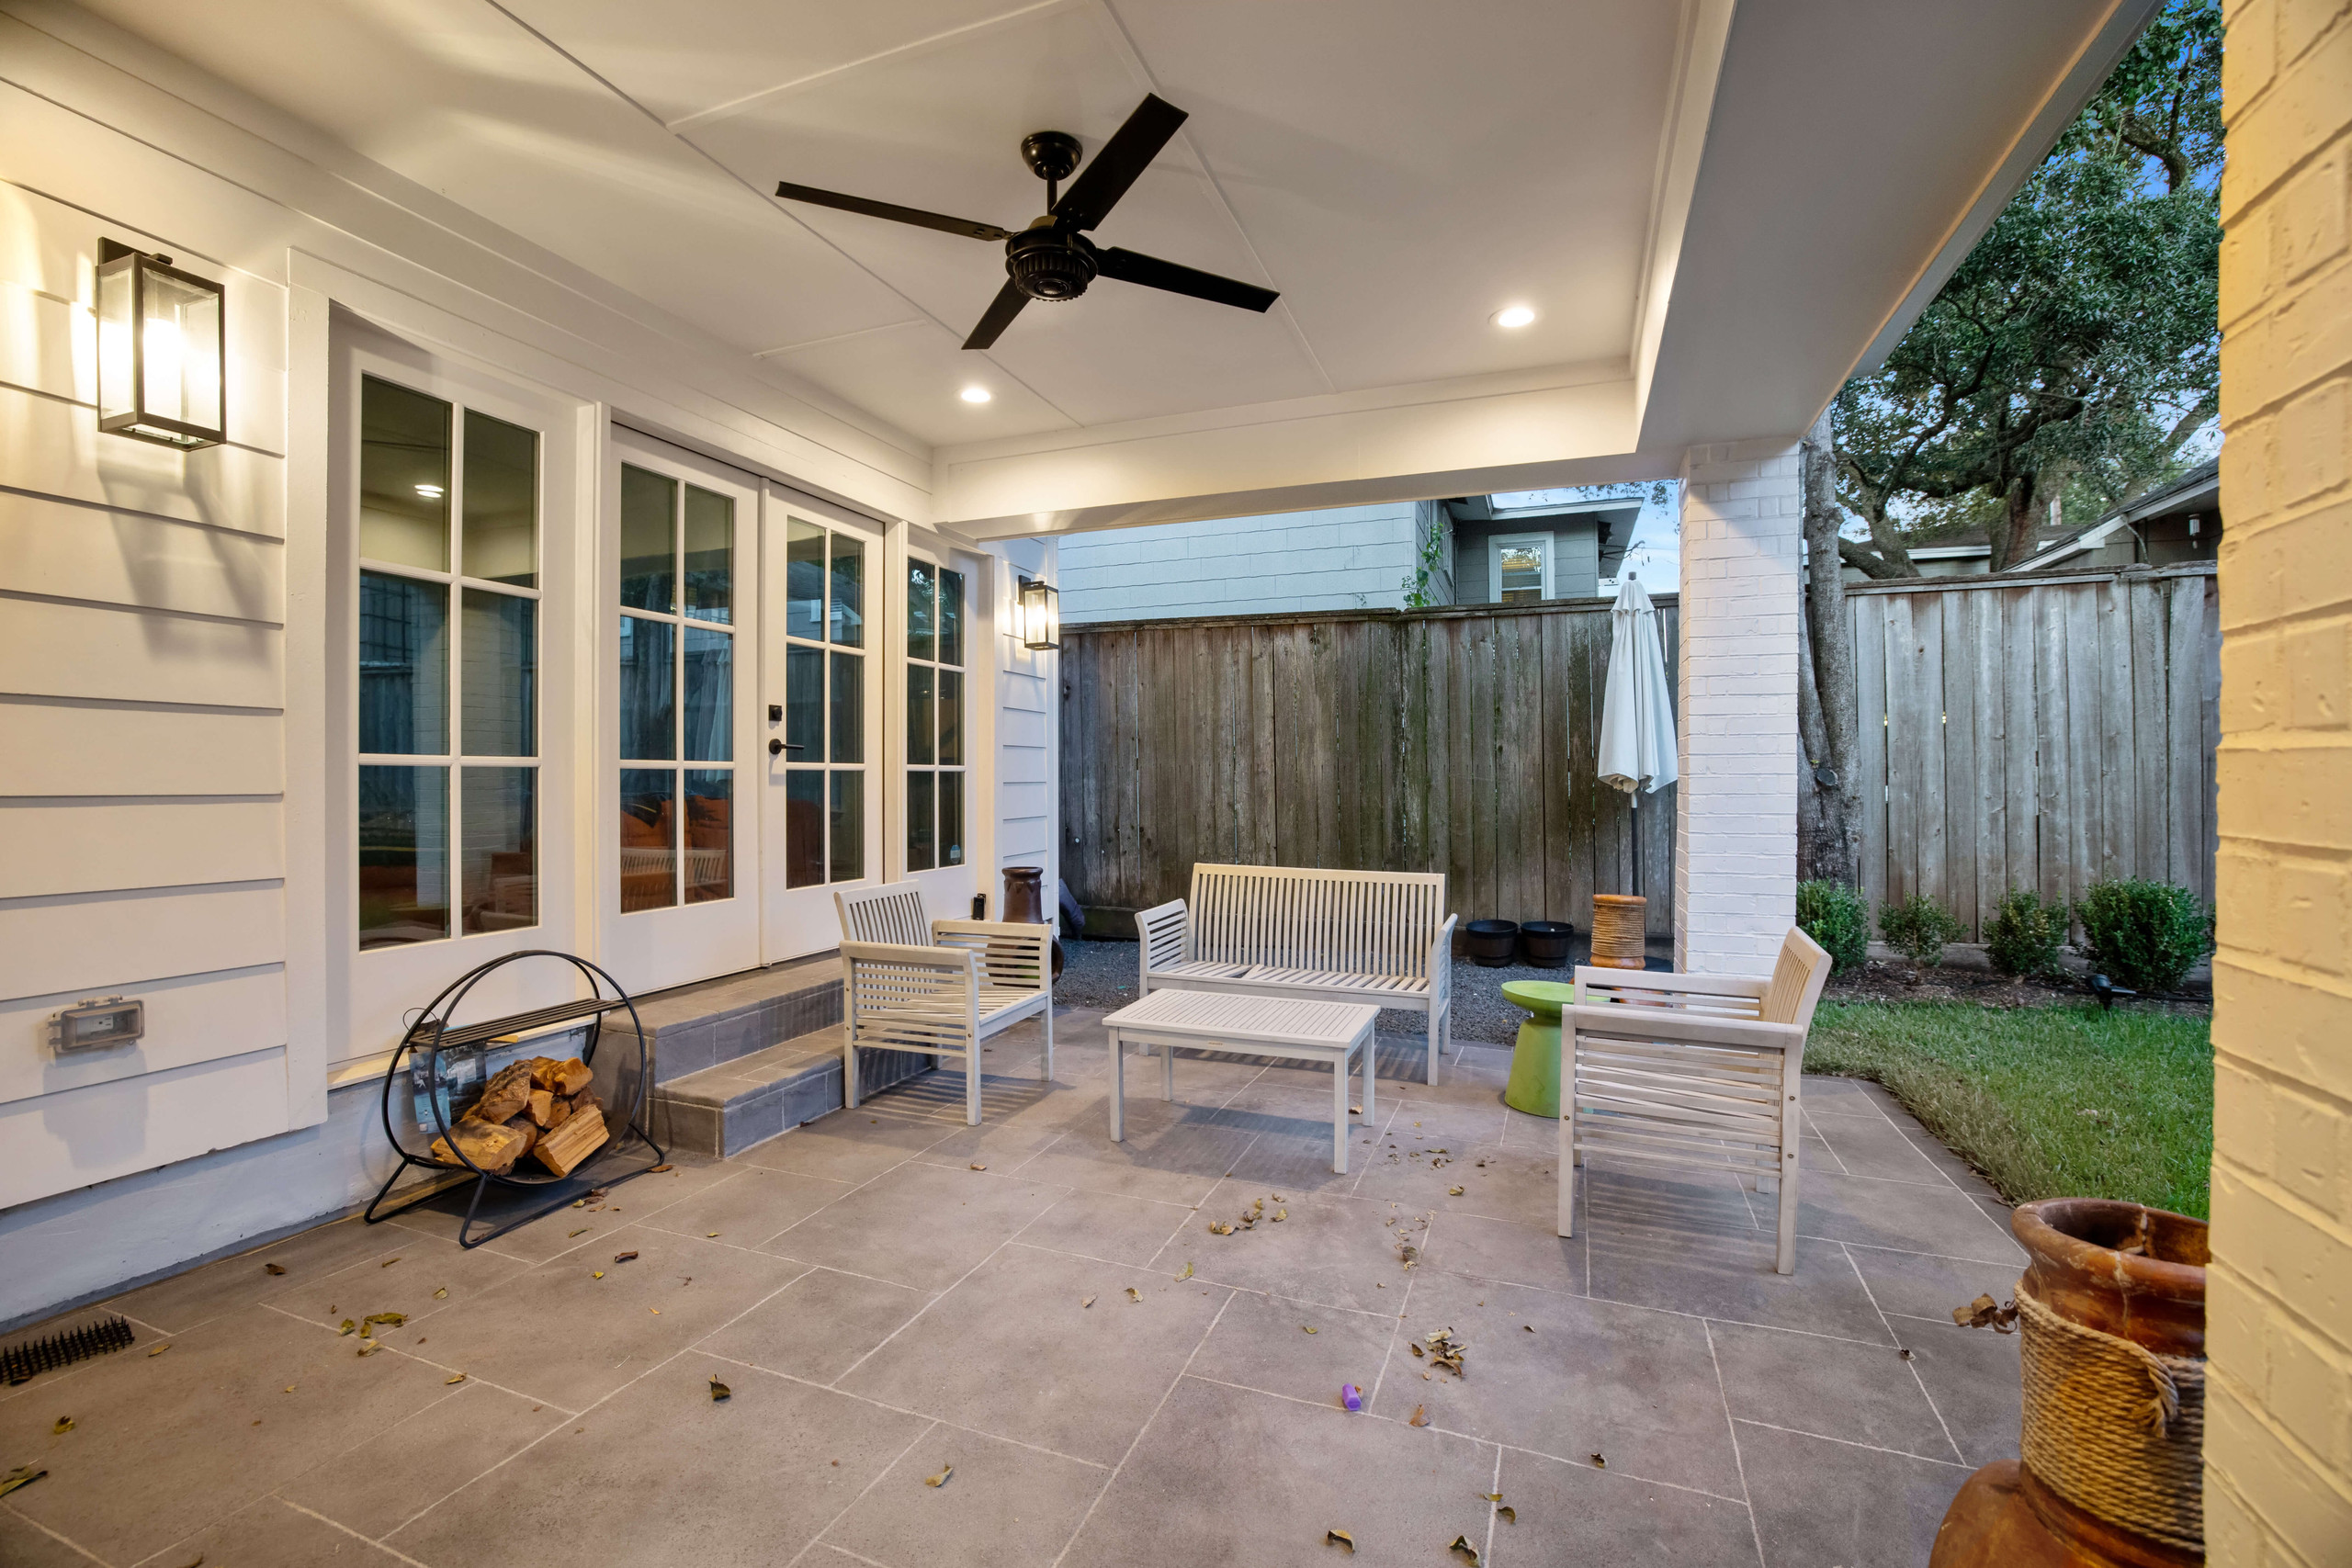 Modern white patio cover ceiling and grey carvestone patio flooring